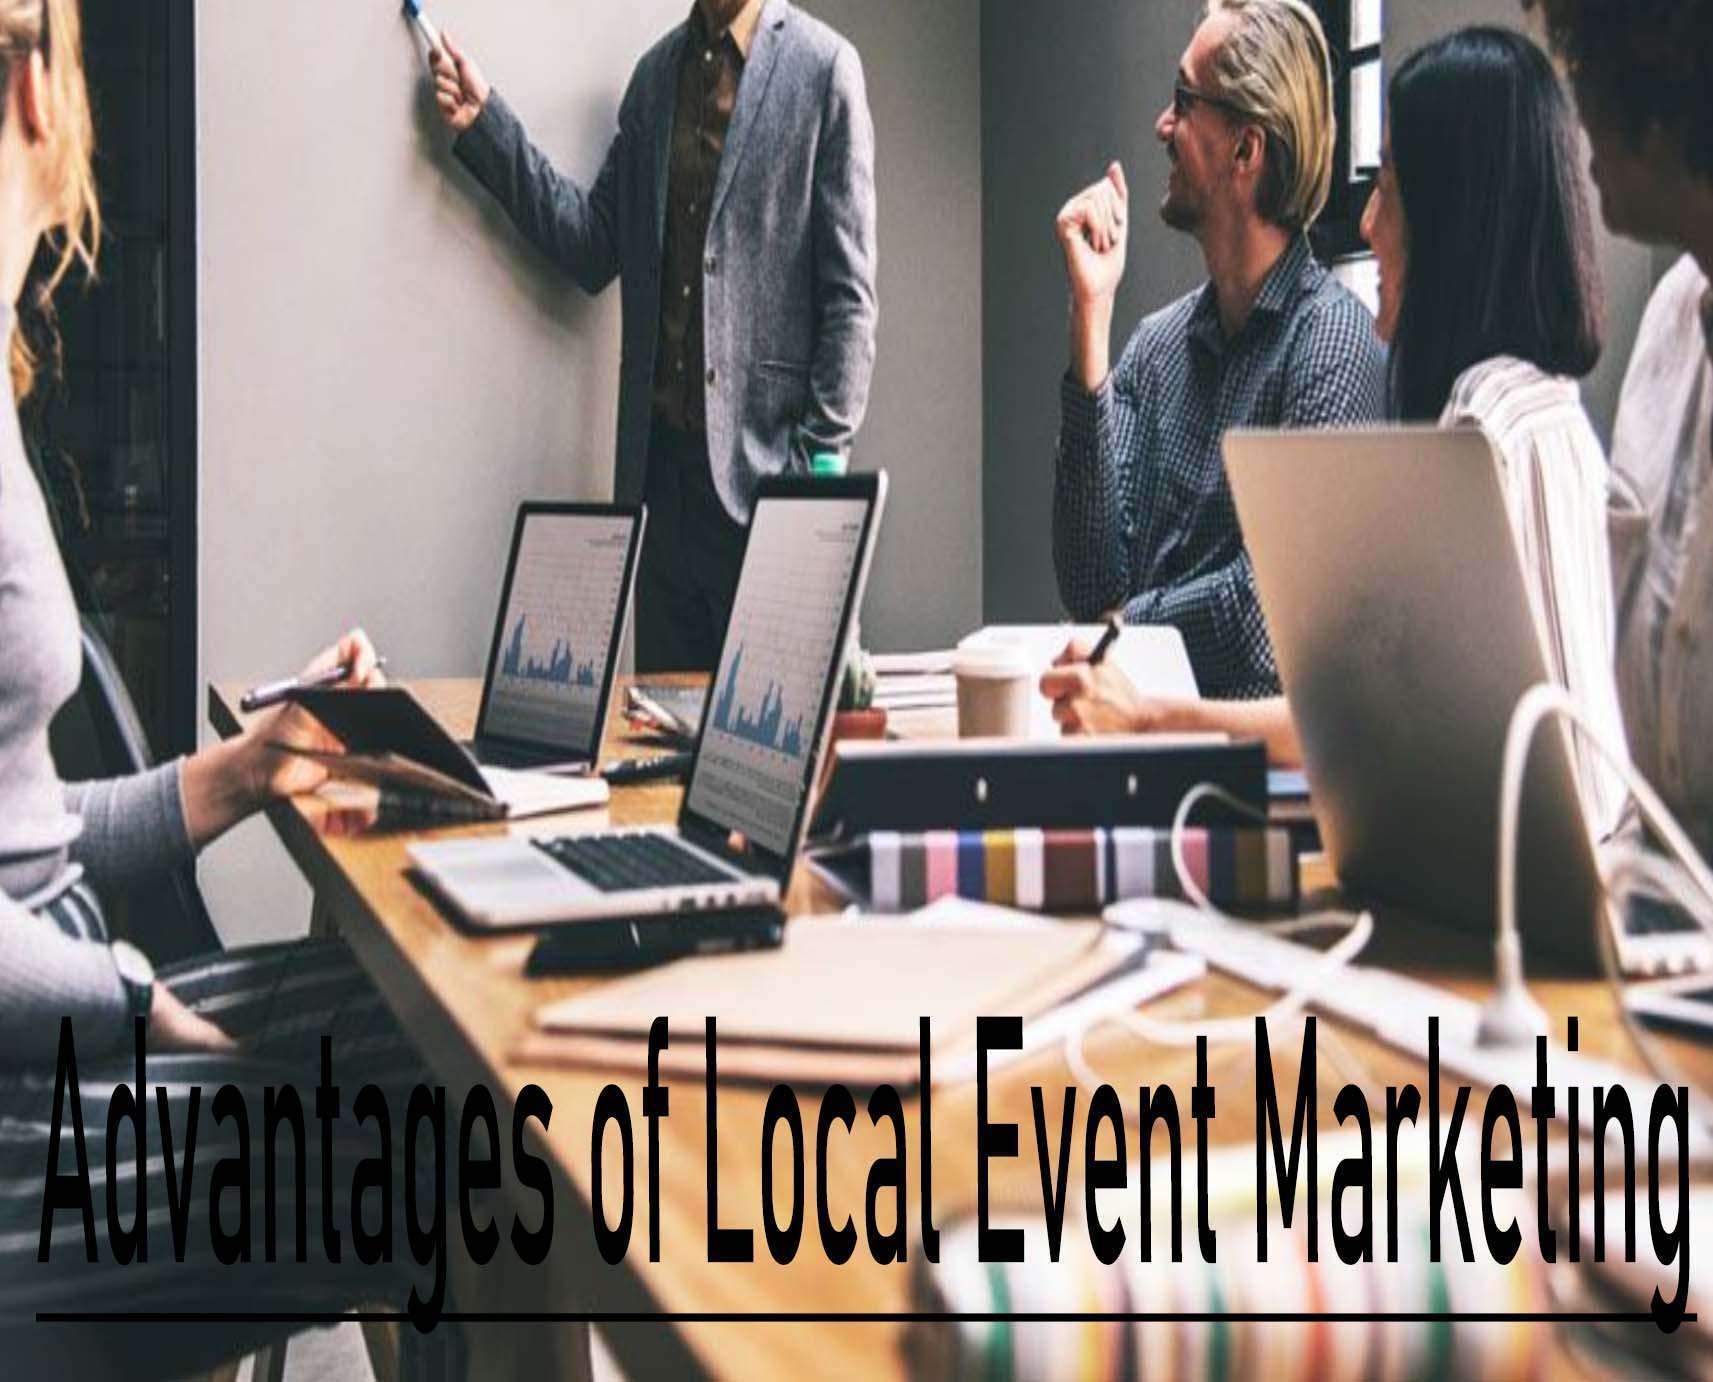 Advantages of Local Event Marketing